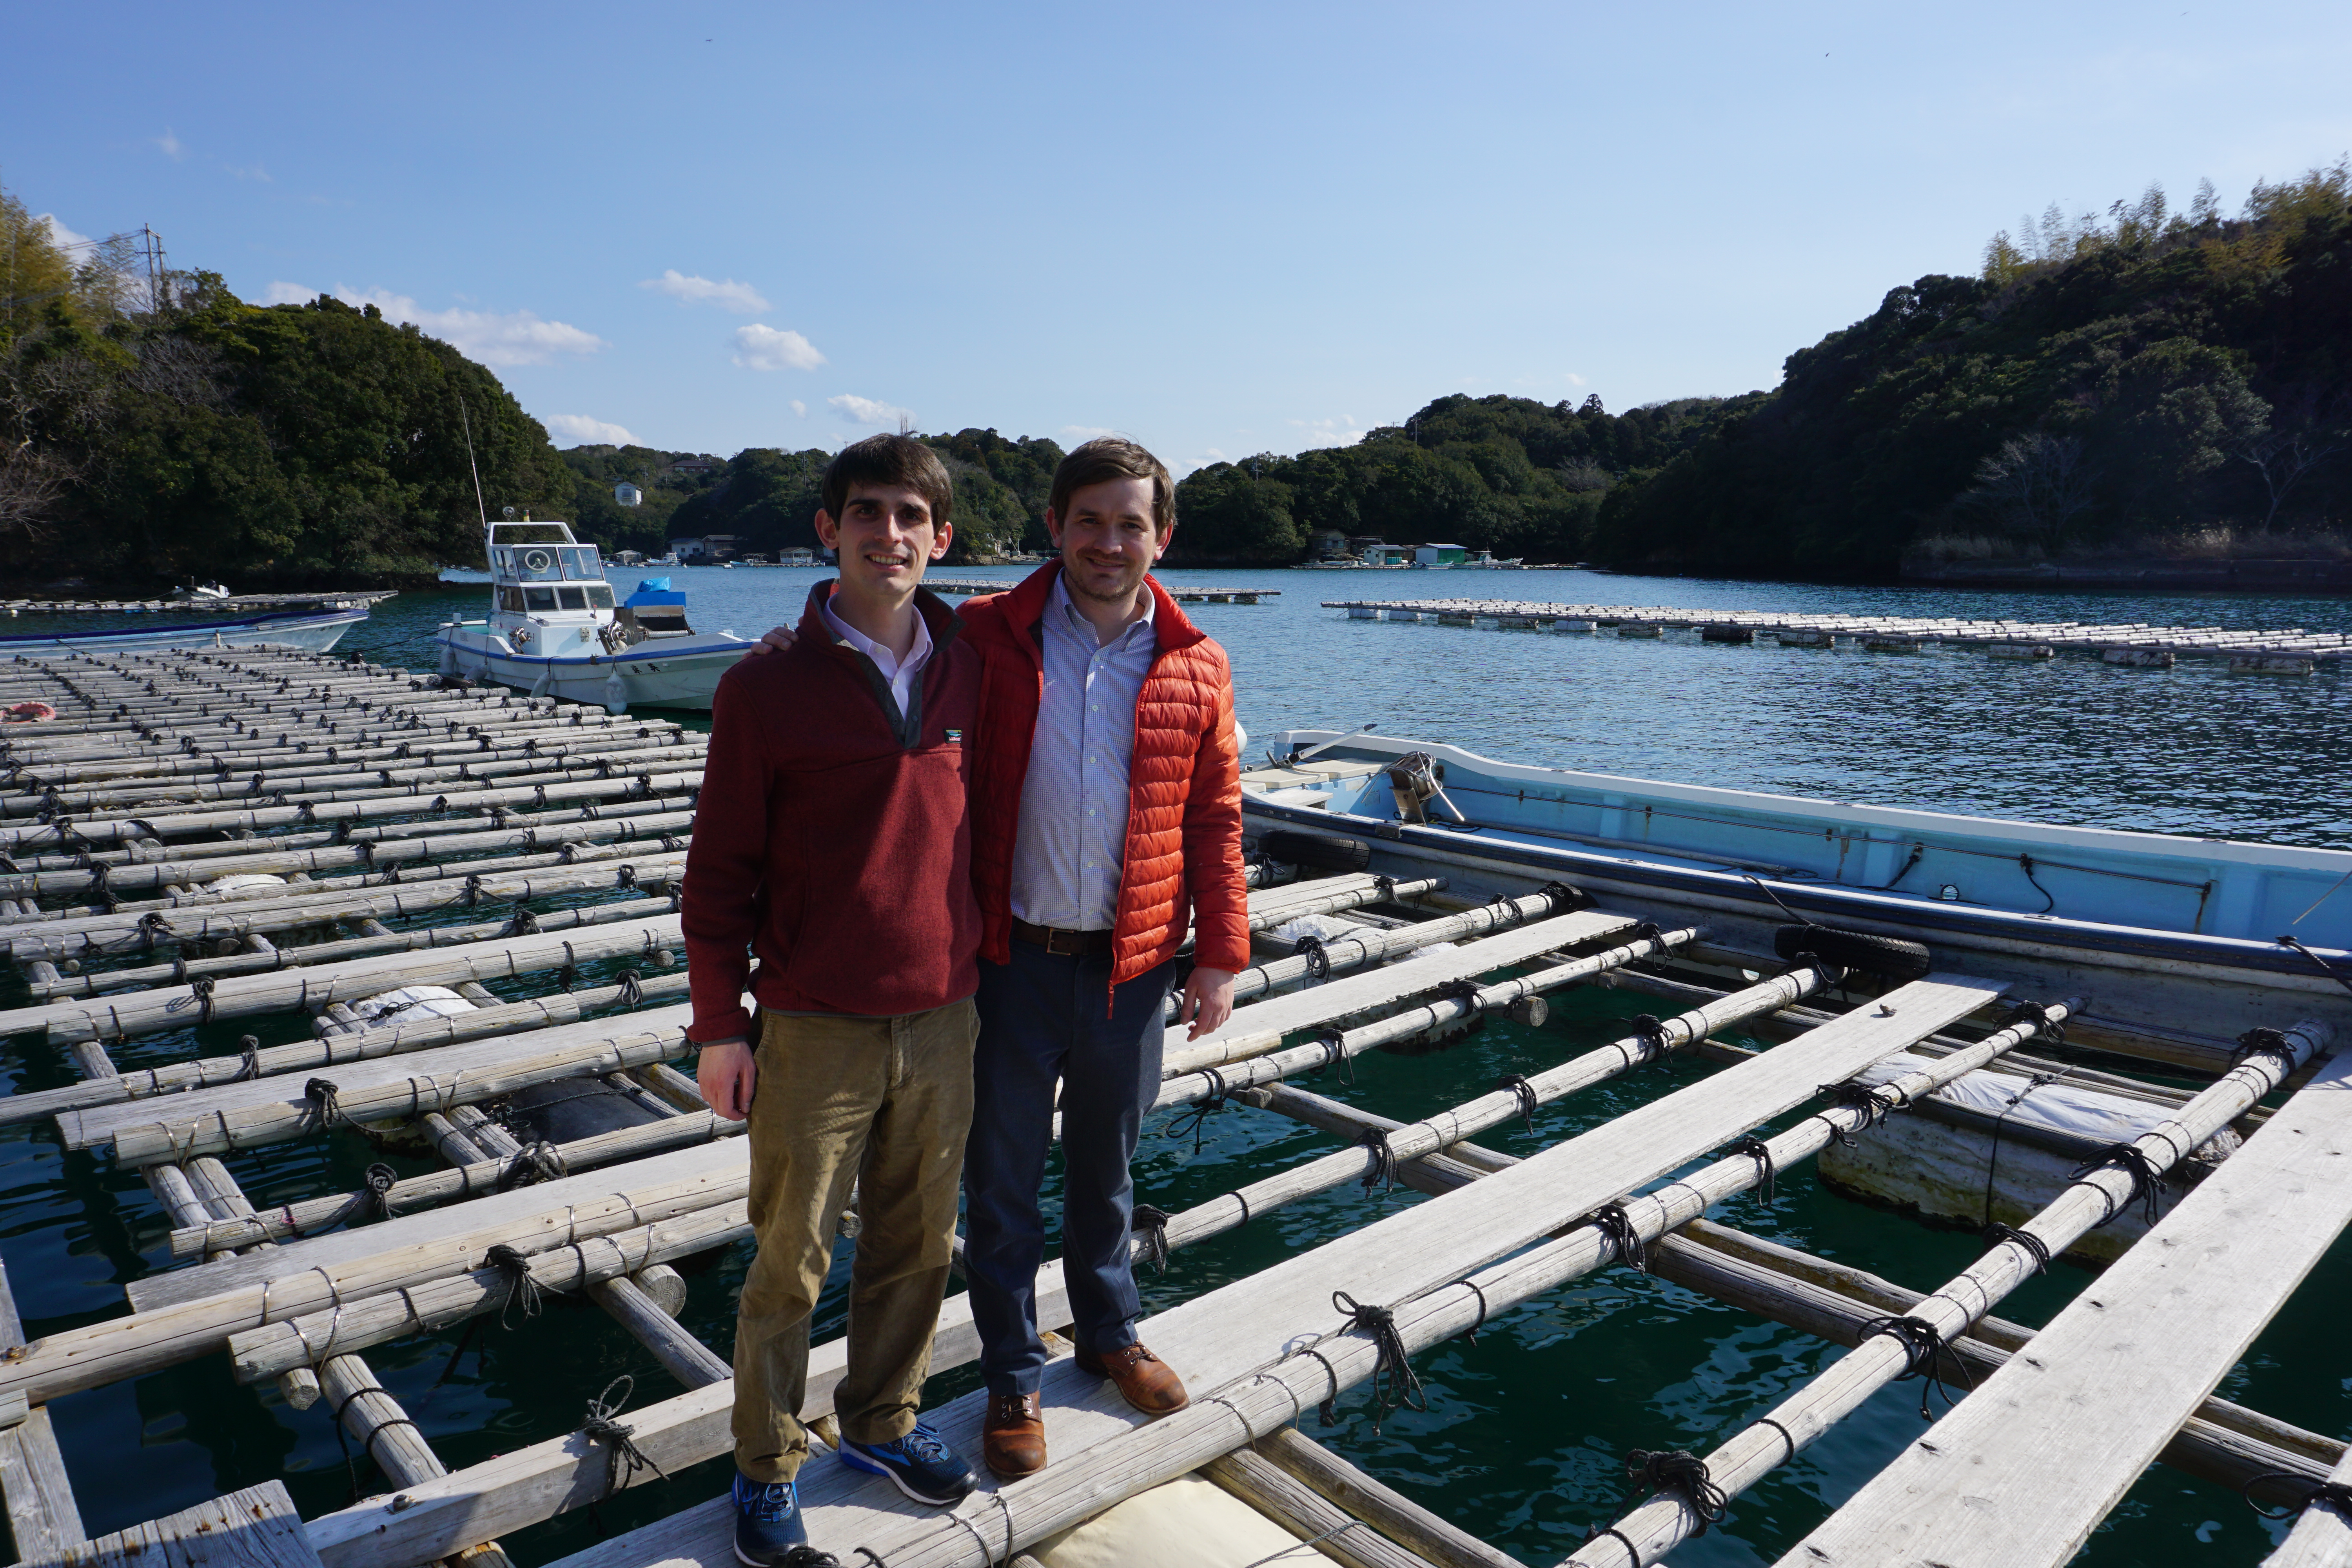 Charlie and Wes taking in the beautiful scenery at the pearl farm in Mie, Japan.